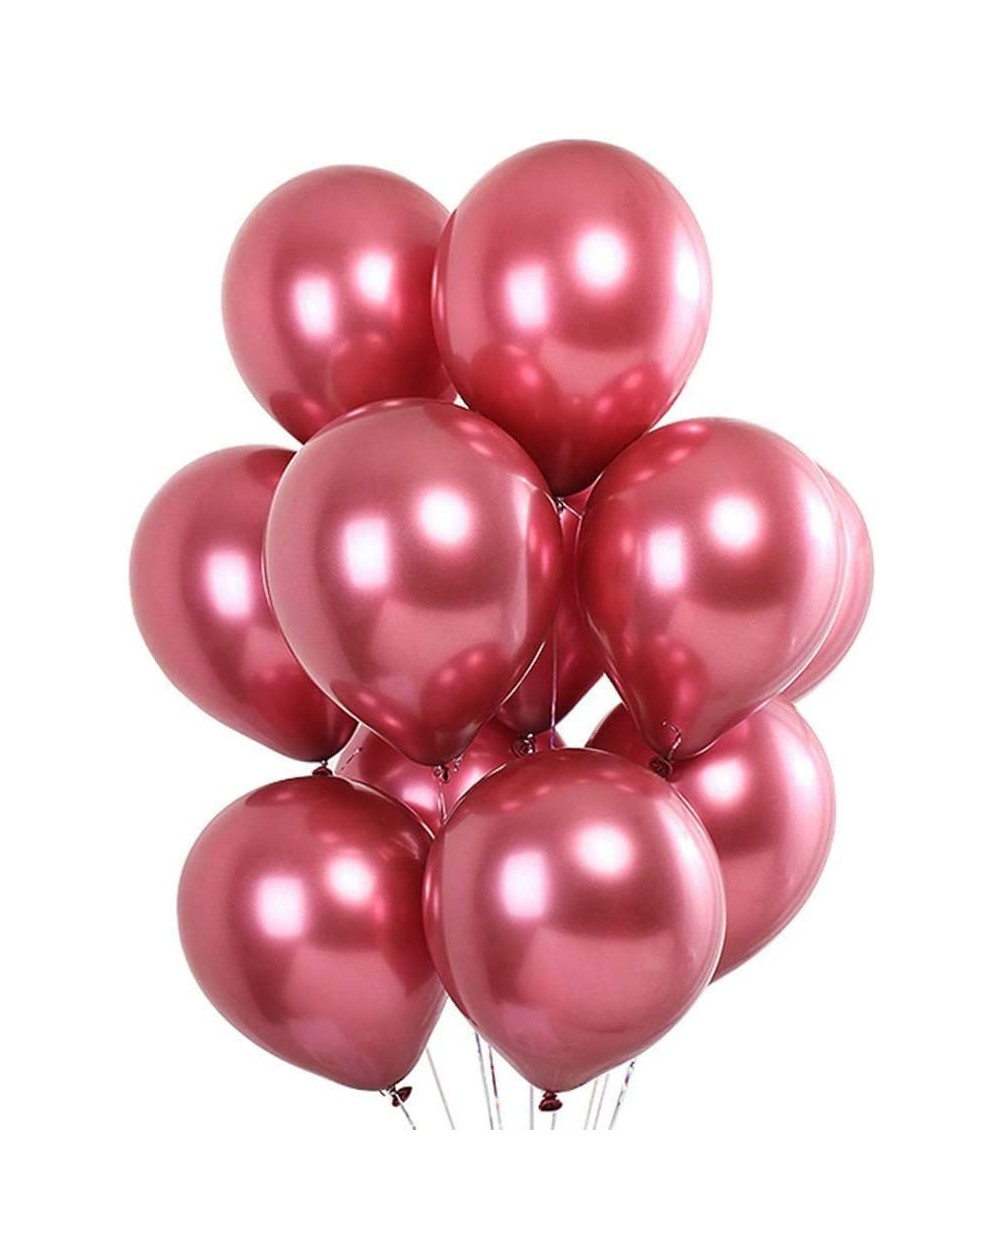 Balloons Chrome Metallic Balloons for Party 50 pcs 12 inch Thick Latex balloons for Birthday Wedding Engagement Anniversary C...